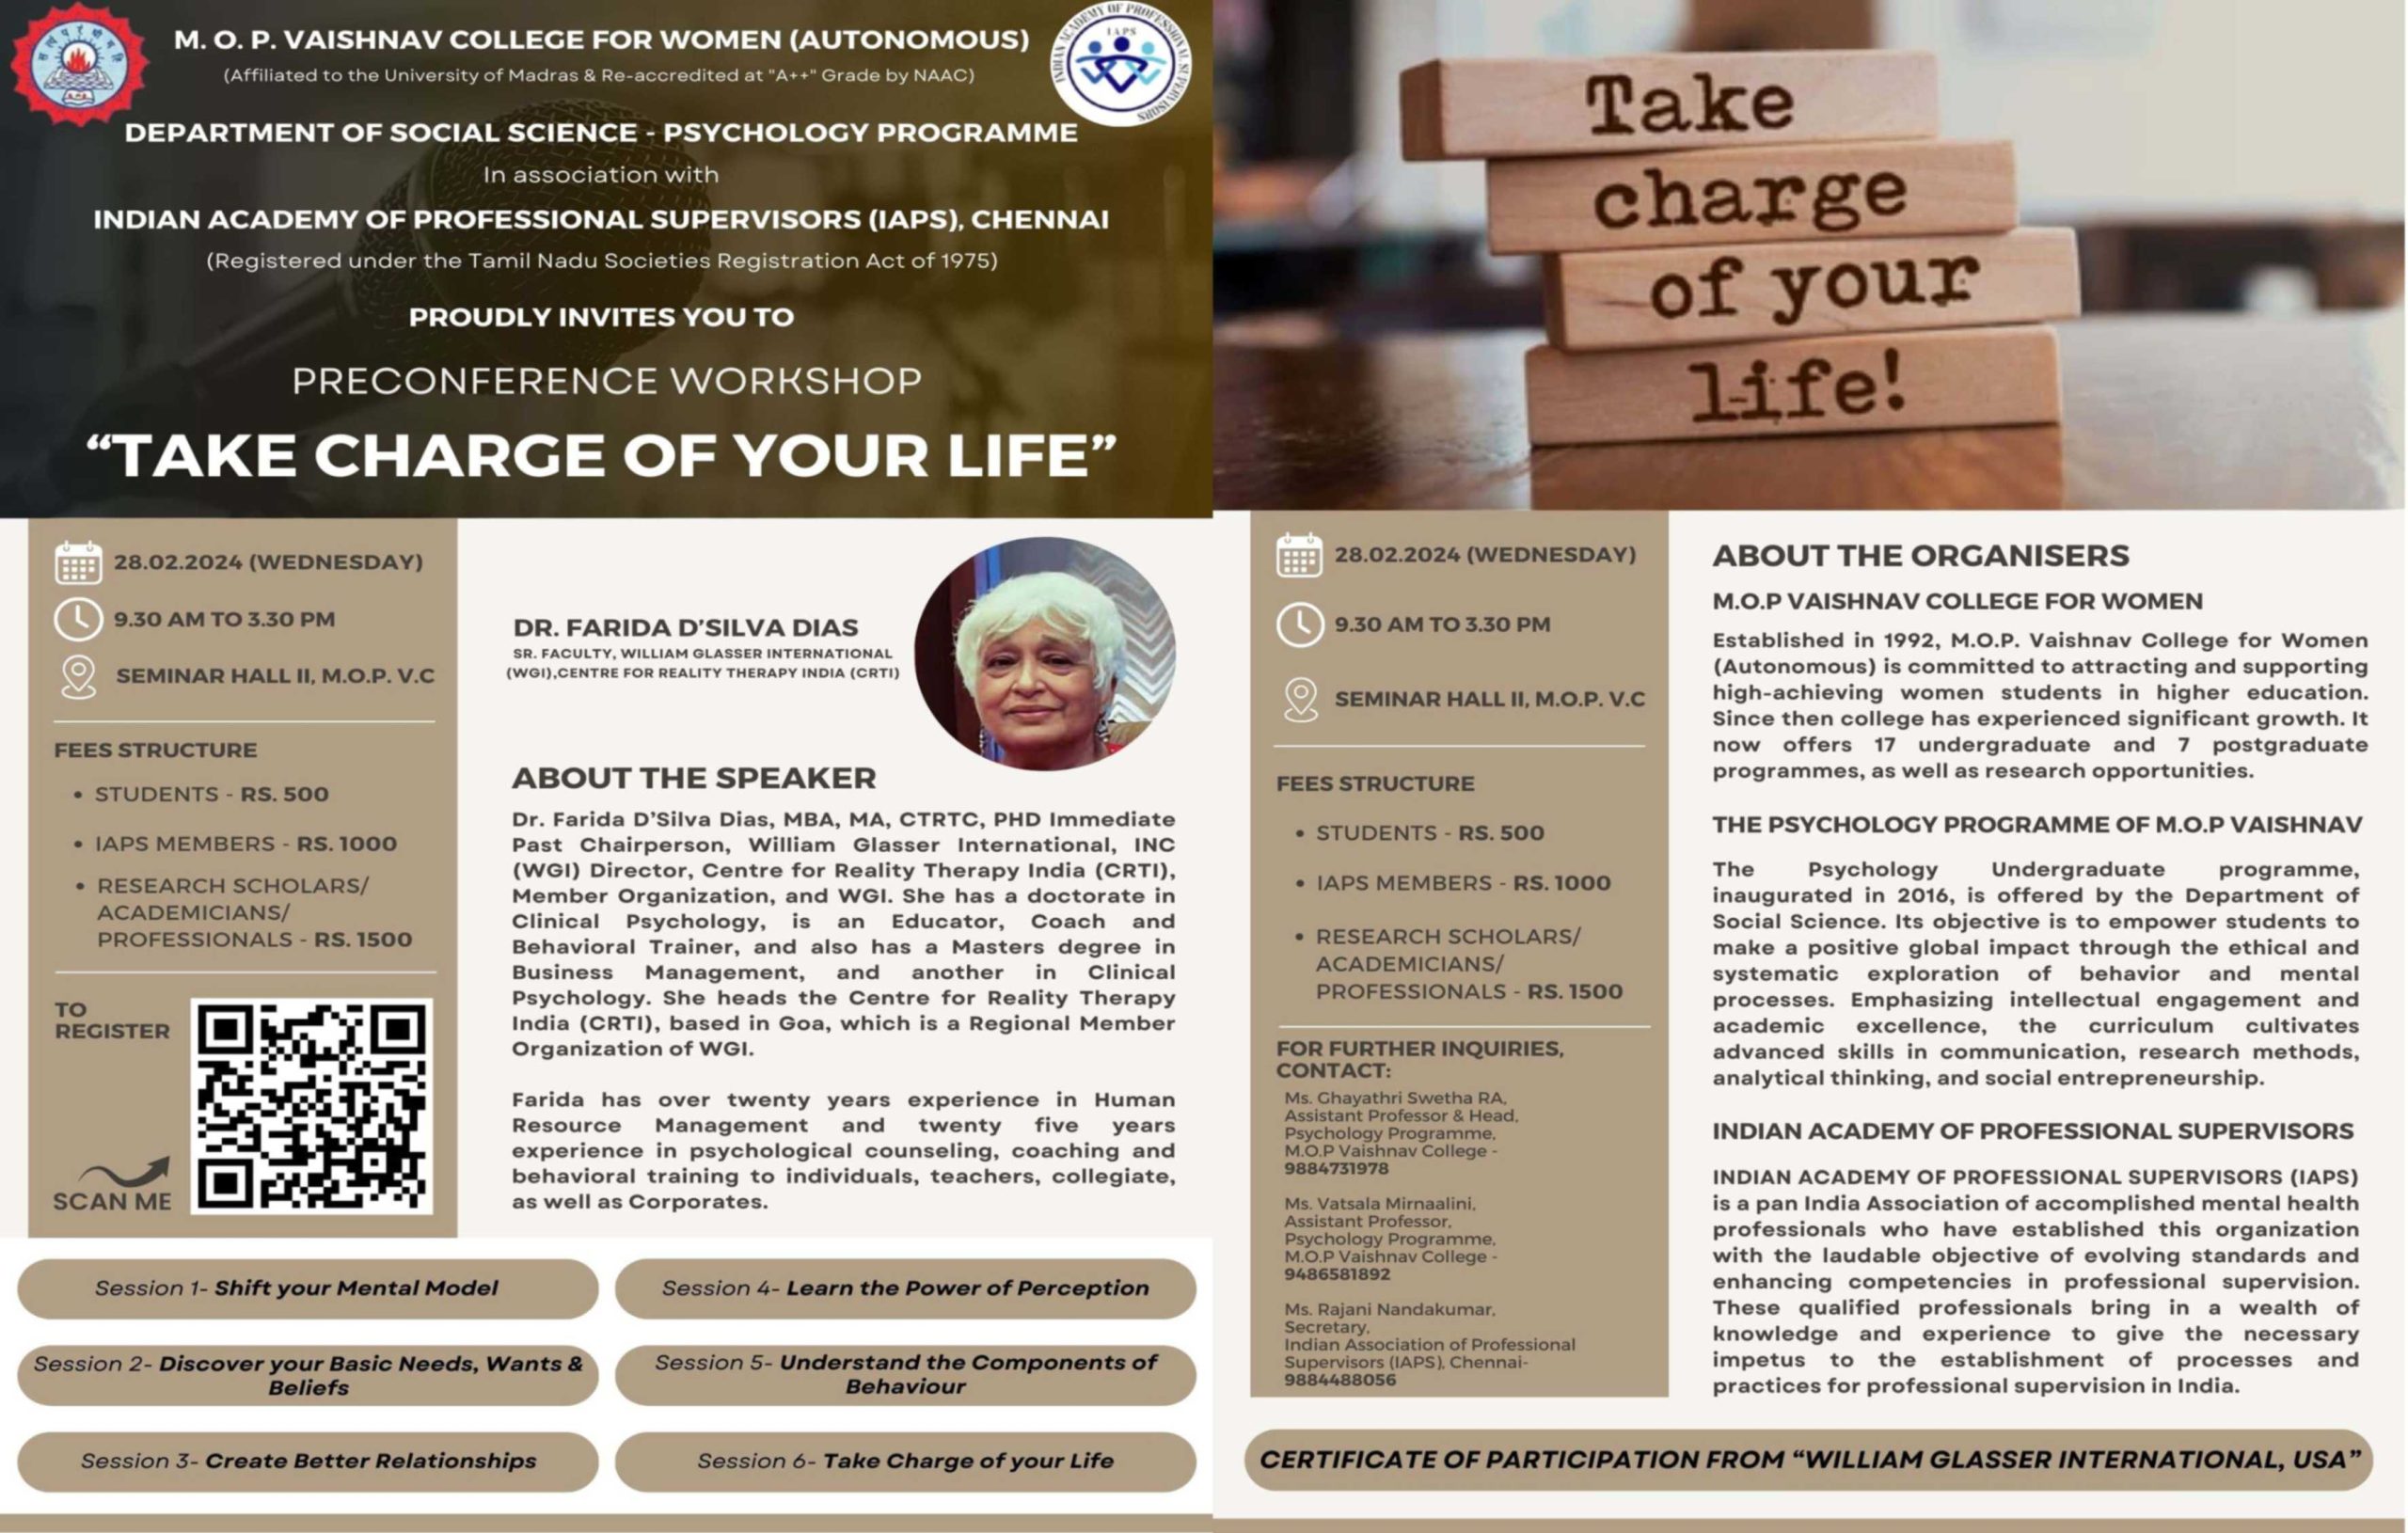 Pre conference workshop "Take charge of your life " on 28.02.2024 from 9:30 AM to 3:30 PM .